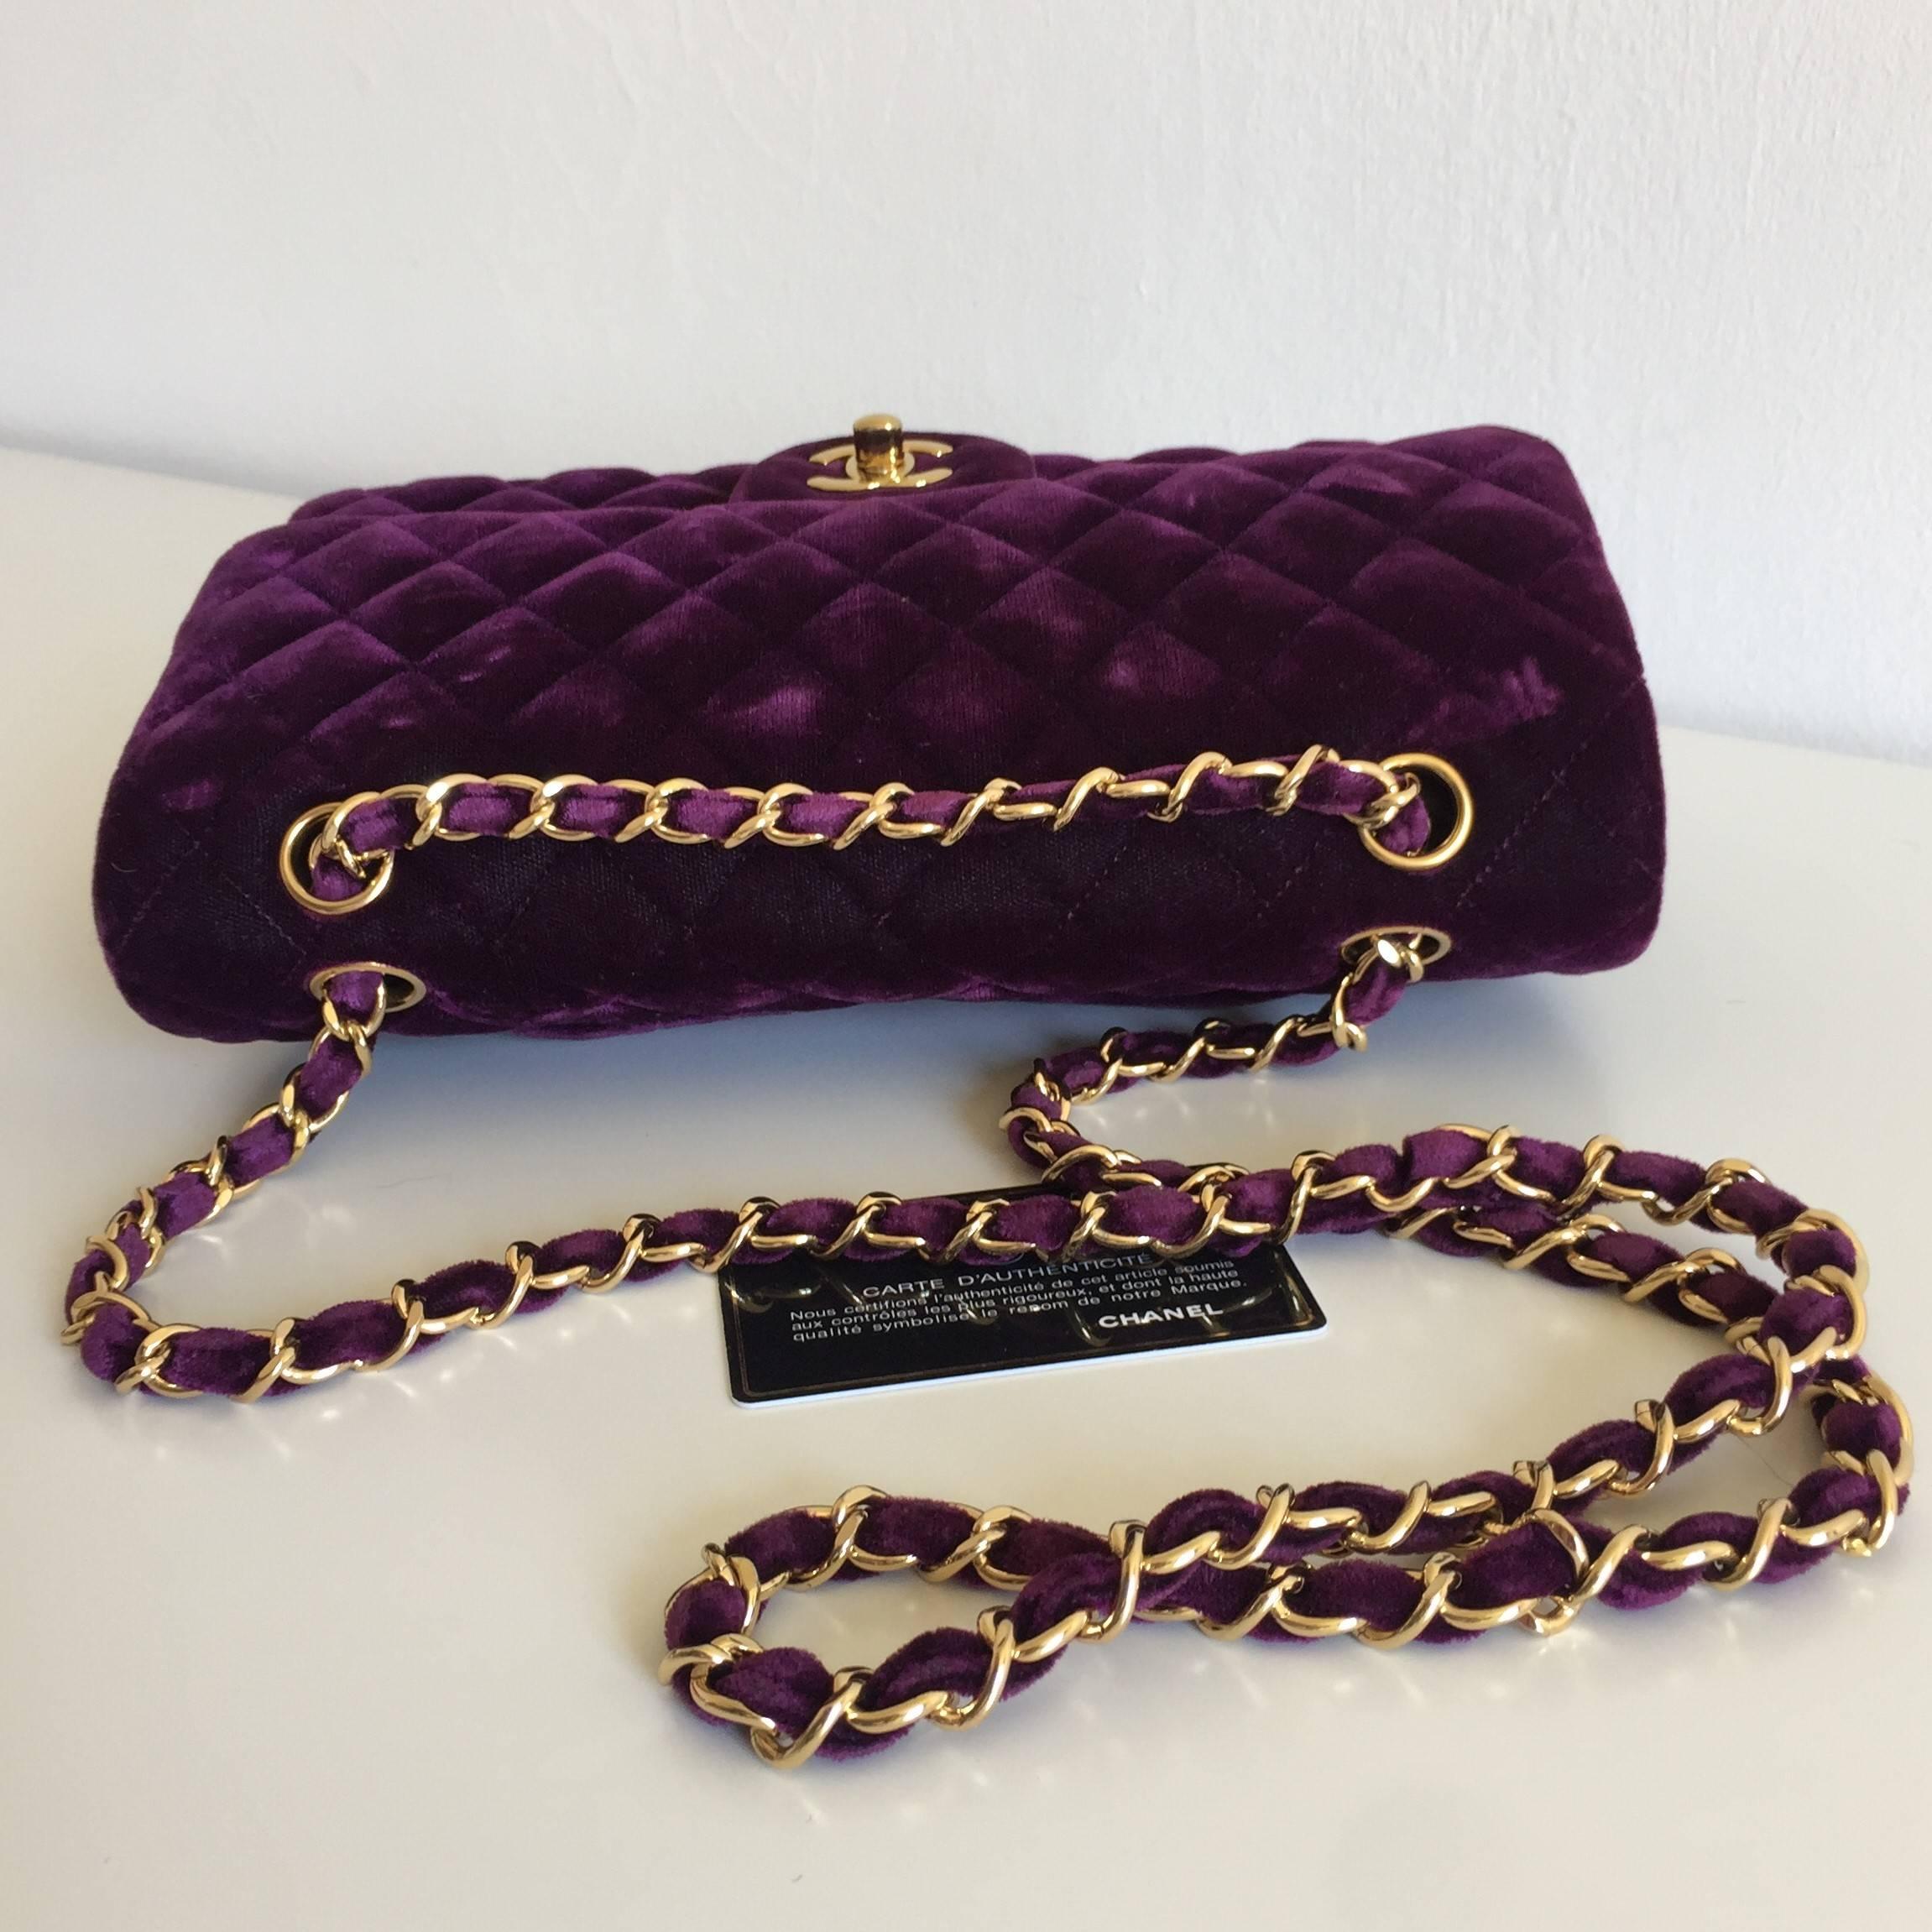 Chanel 2.55 Timeless Purple Velvet double flap with golden hardware, comes with authenticity card e dustbag. Used in very good condition, light signs of wear on corners, a light stain inside.
